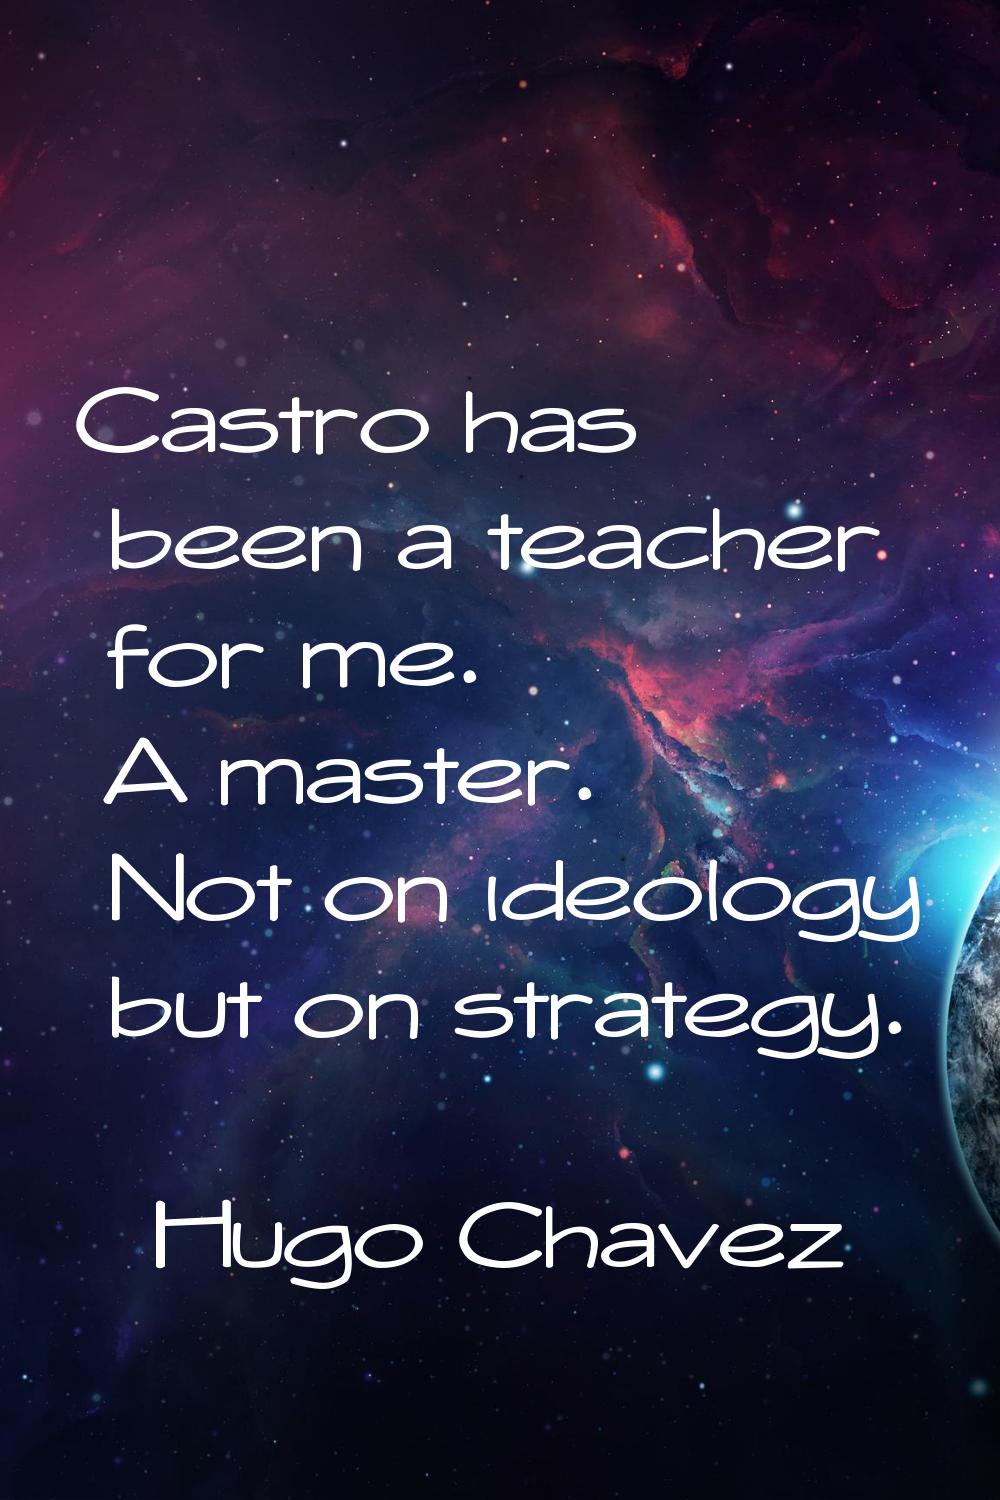 Castro has been a teacher for me. A master. Not on ideology but on strategy.